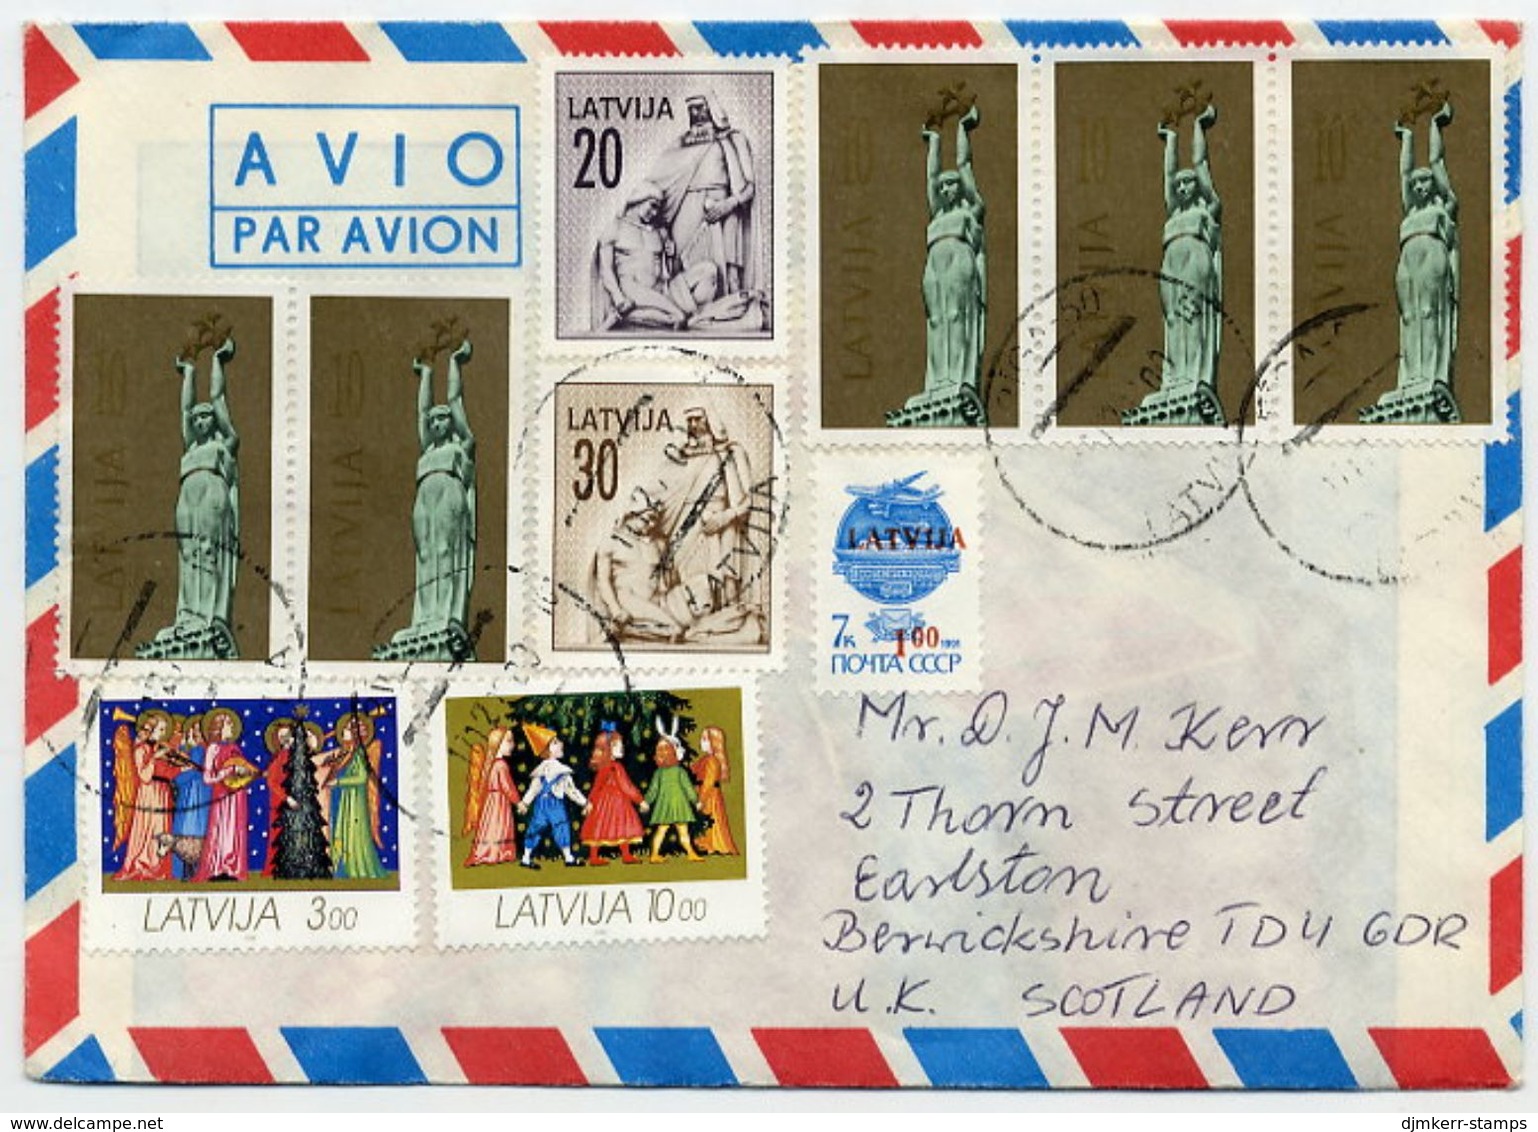 LATVIA 1992 Airmail Cover With Mixed Franking - Letonia